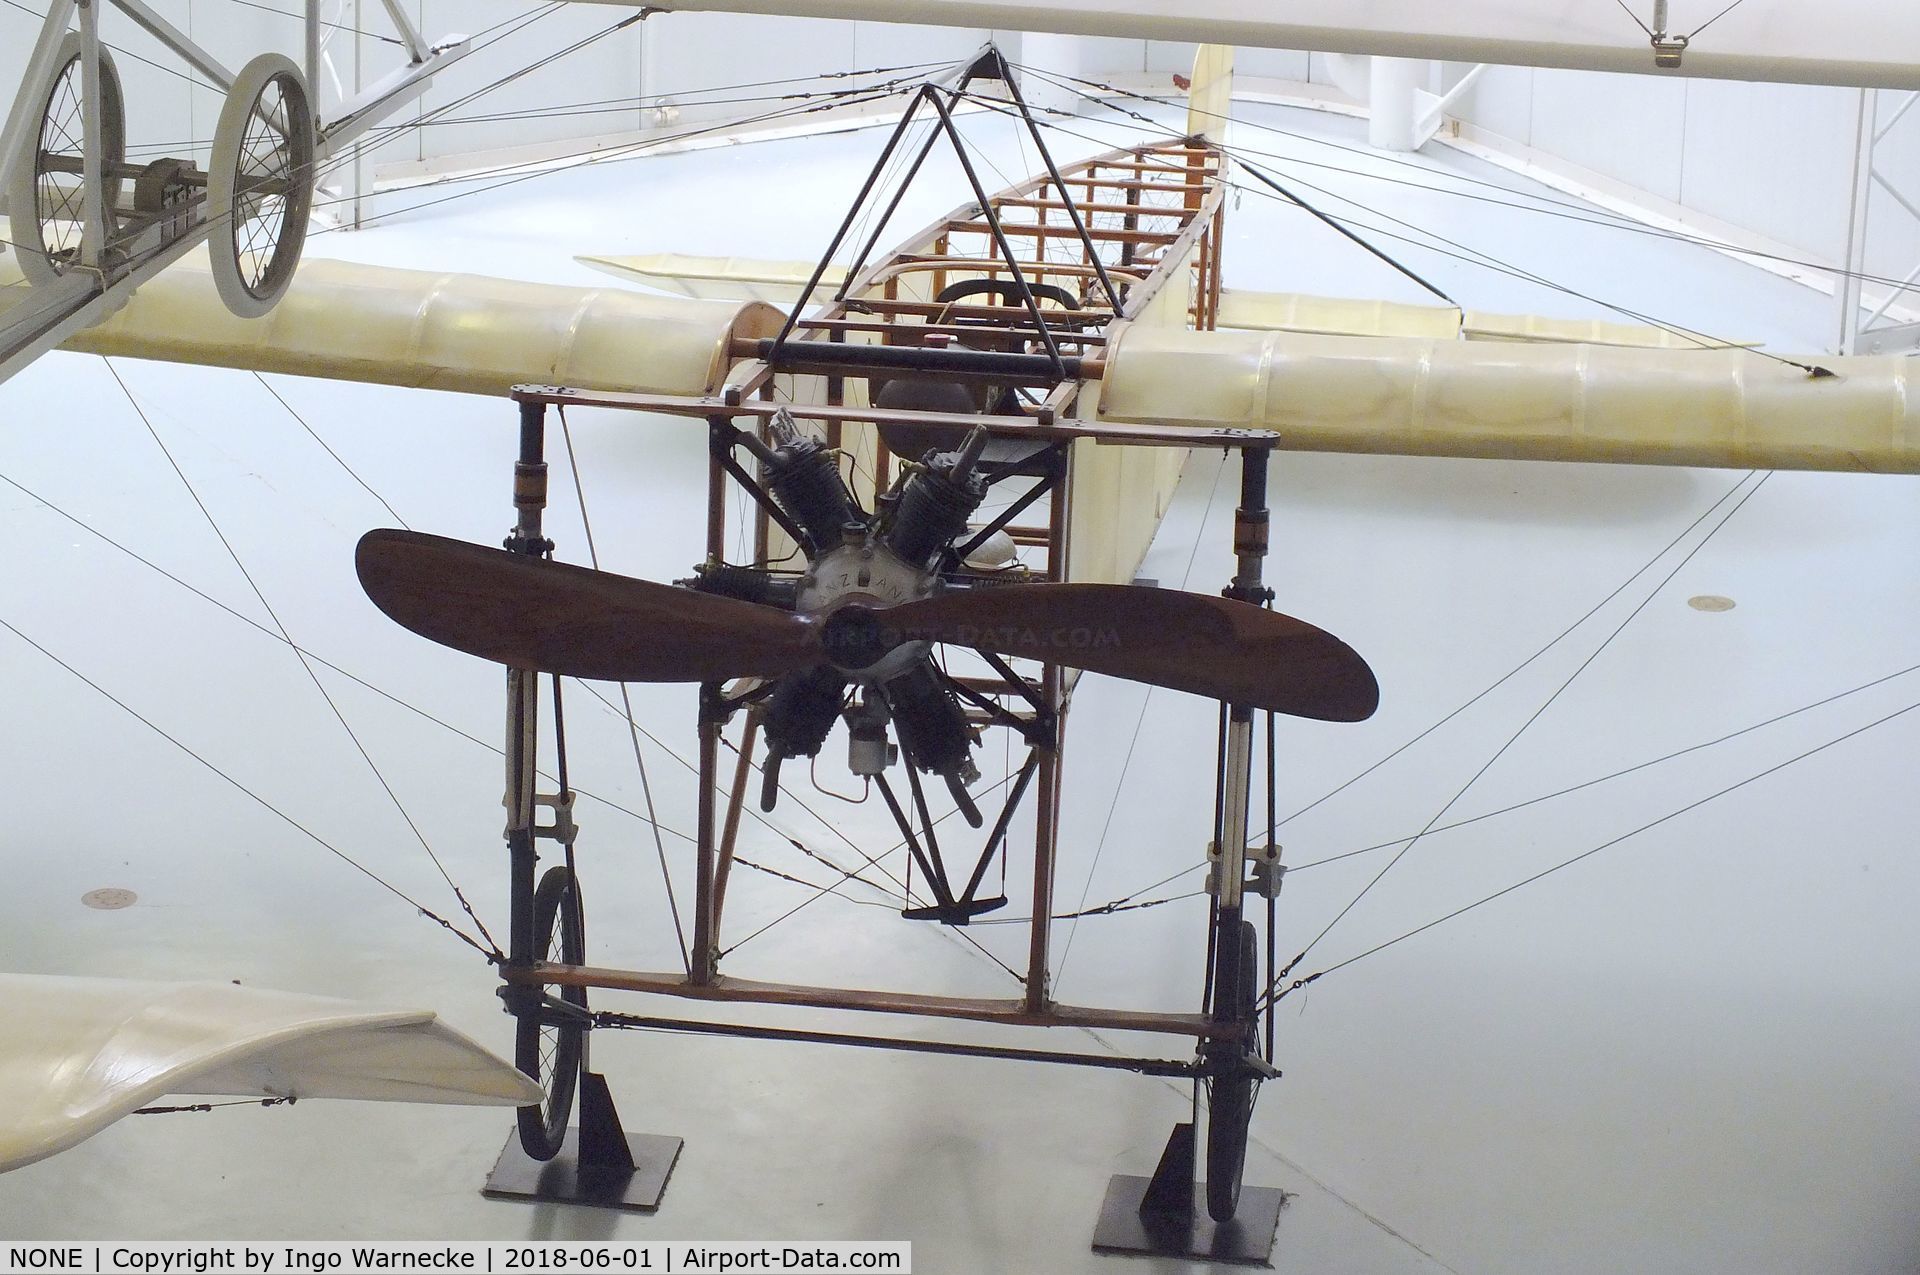 NONE, Bleriot XI replica C/N None, Bleriot XI replica at the US Army Aviation Museum, Ft. Rucker